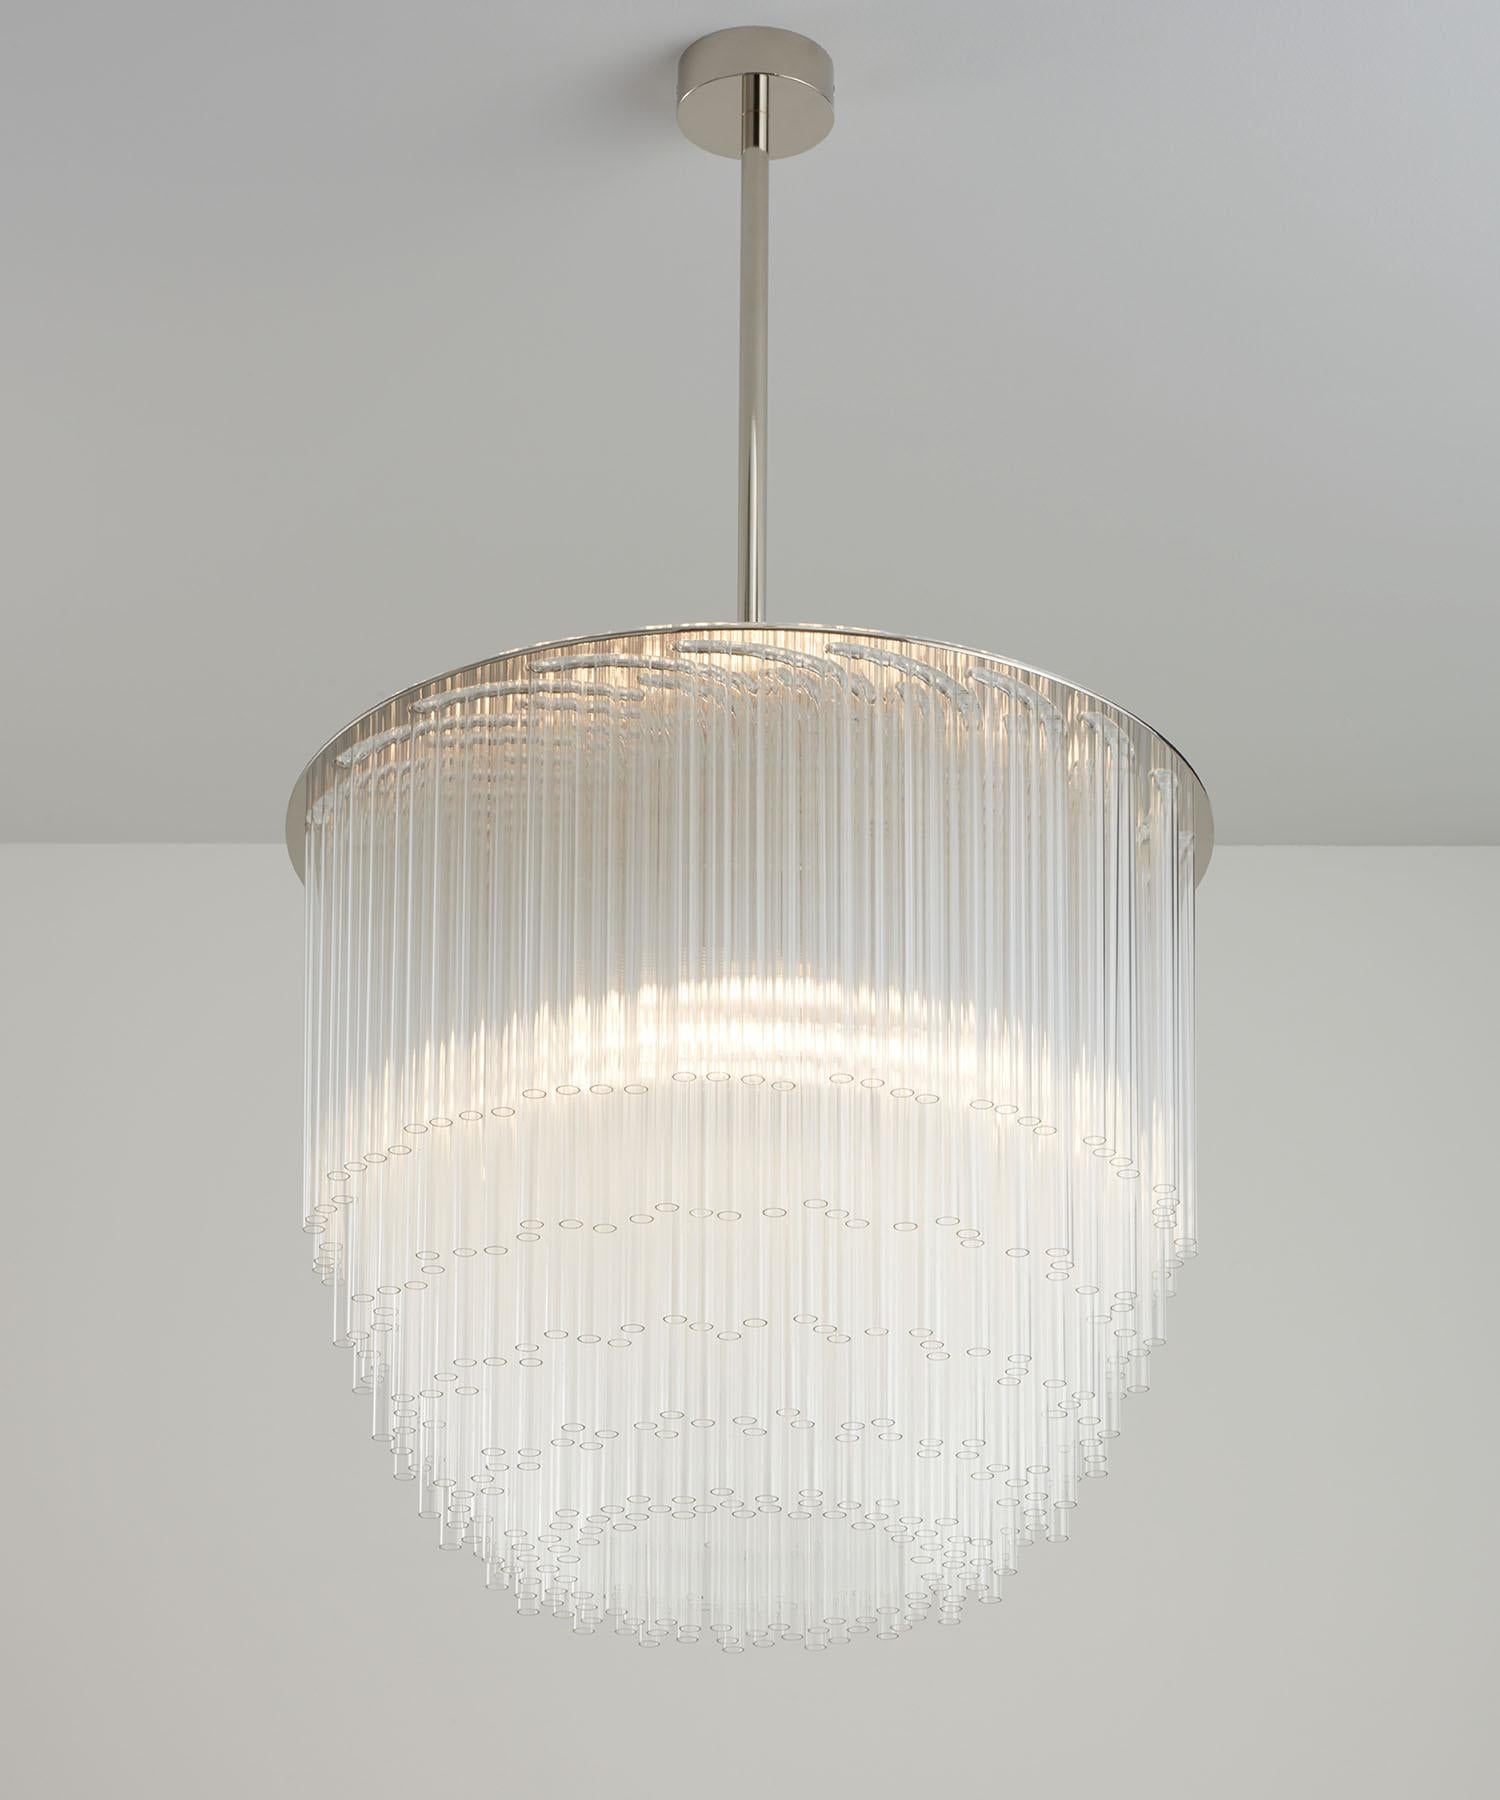 A true centrepiece and the perfect focal point for your space, the Disc Chandelier is one of our most popular designs. The clear borosilicate glass comes in a standard configuration and is extremely durable. The light has a made-to-measure stem and